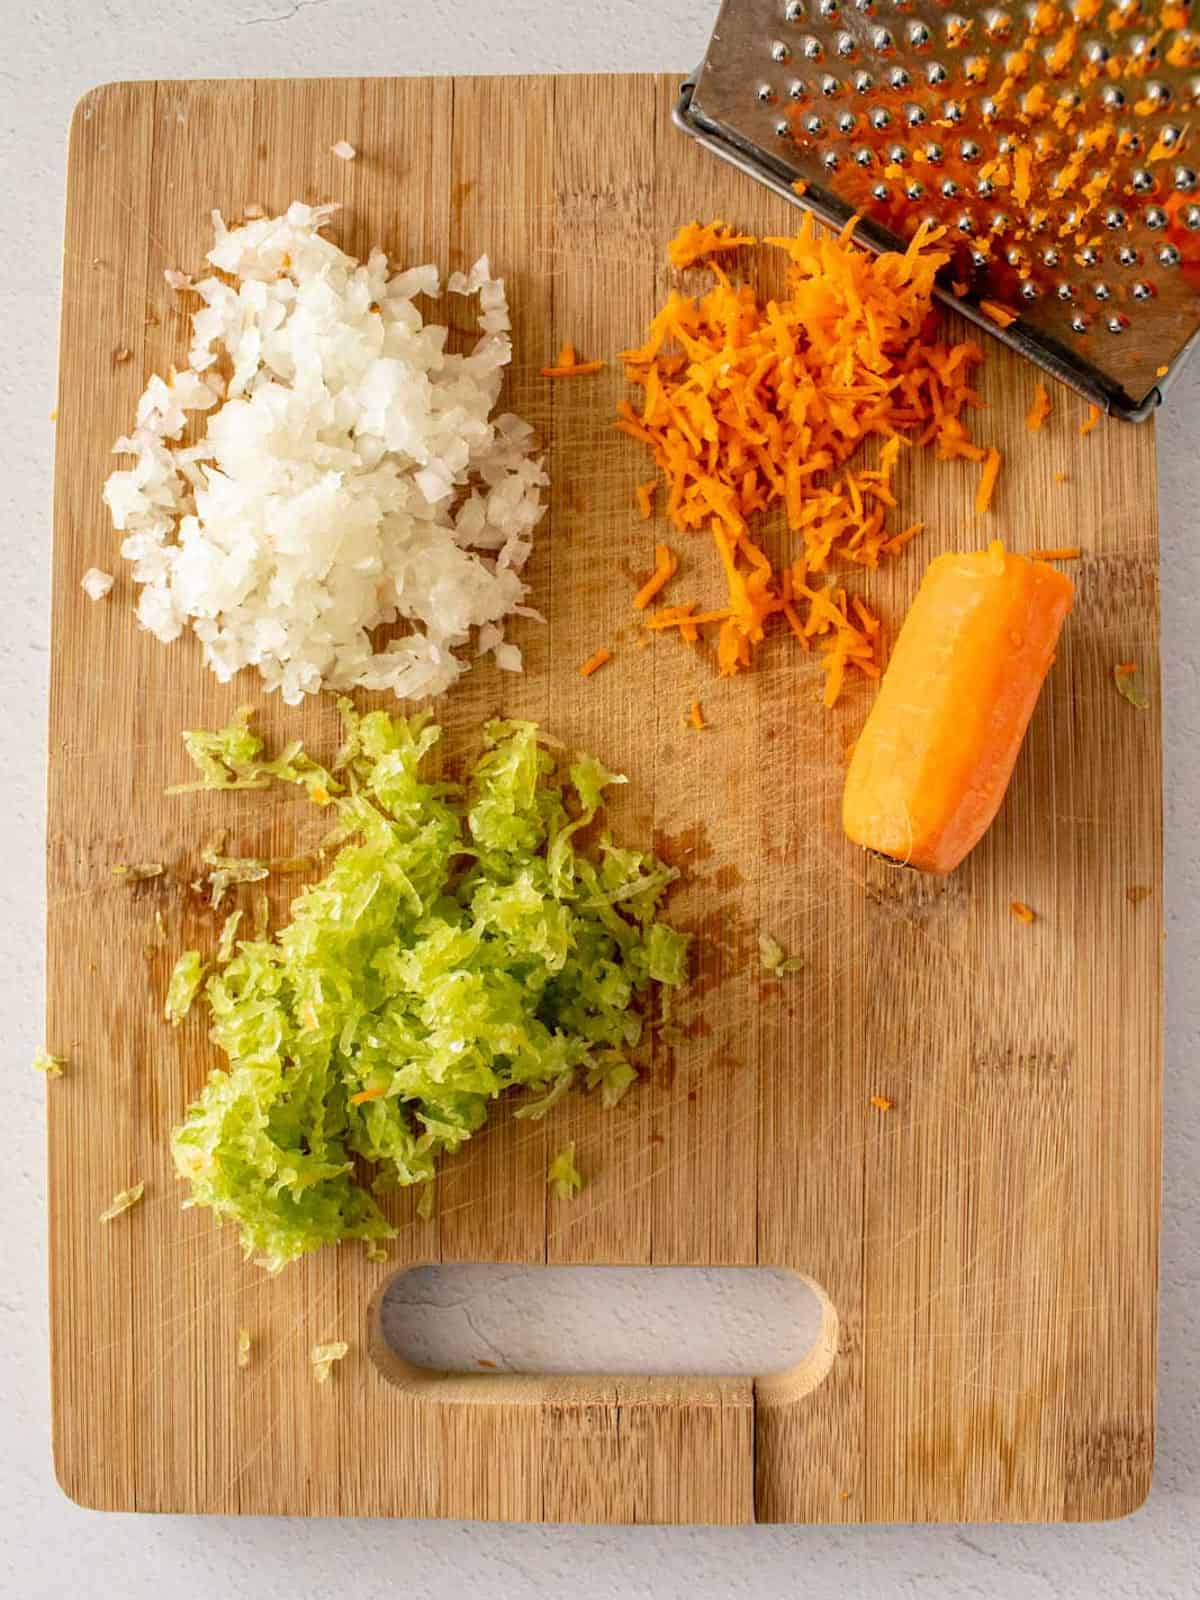 Grated onions, carrots, and celery on cutting board, a soffritto mix of vegetables.